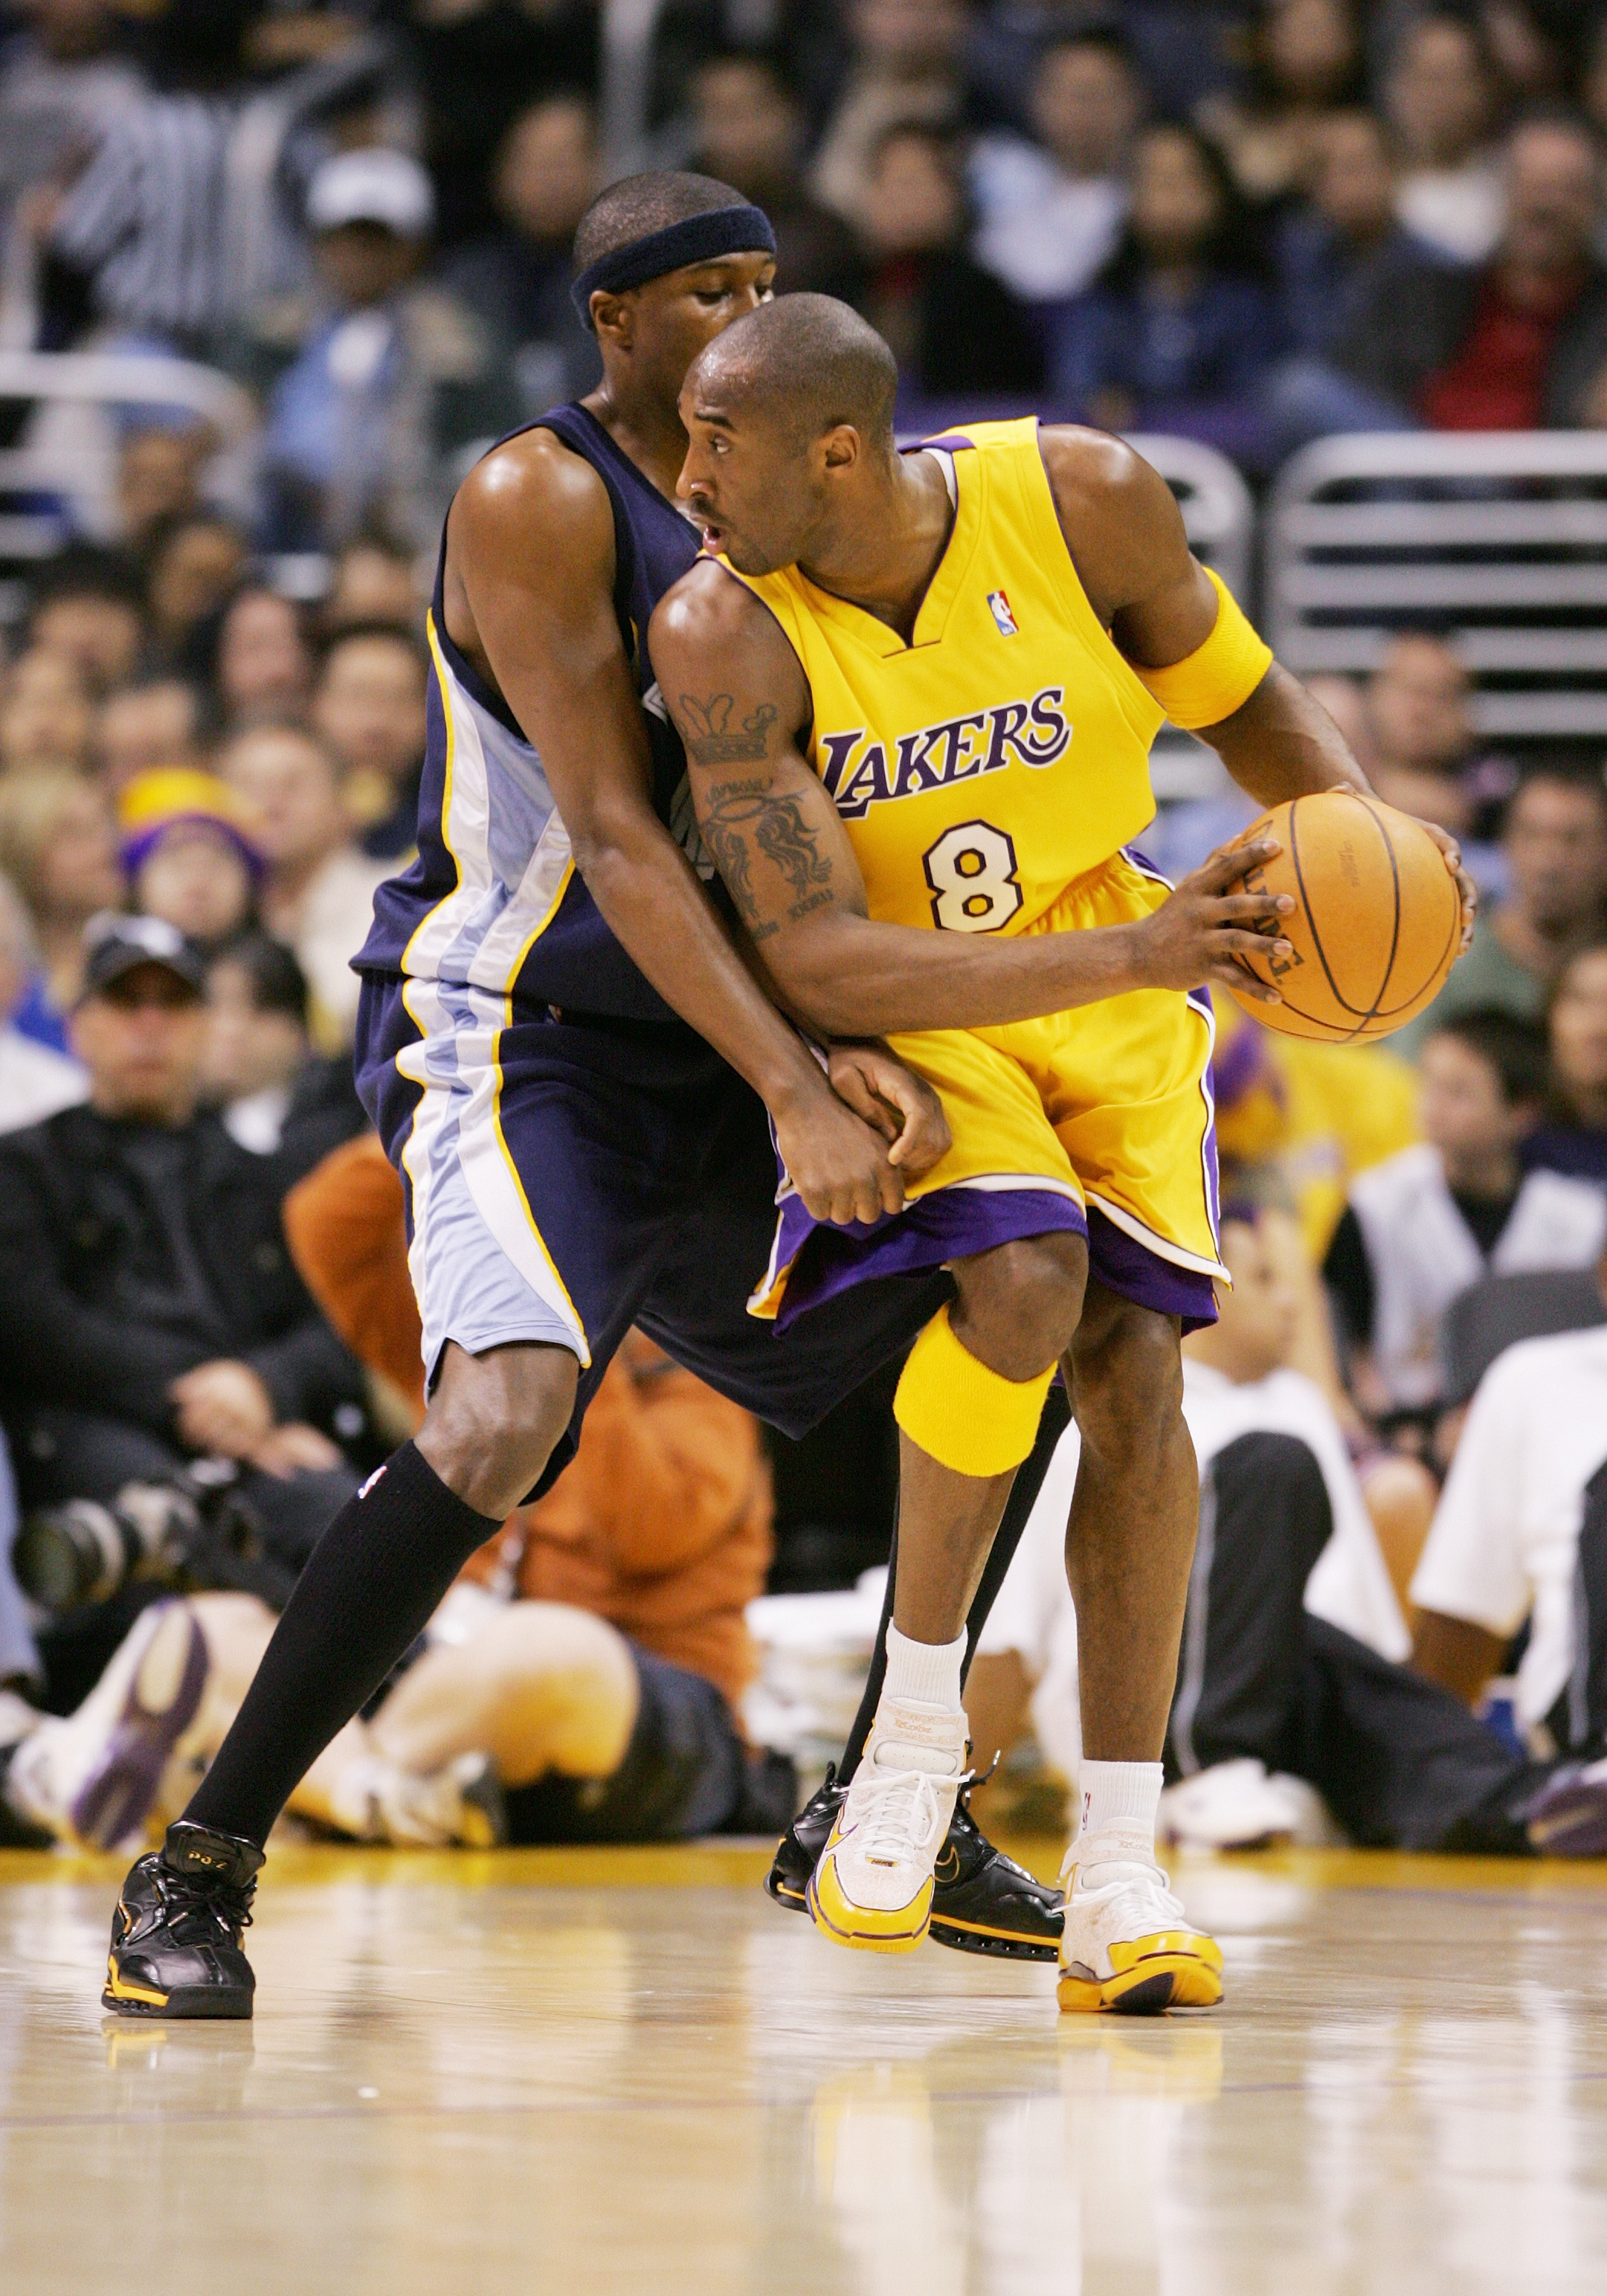 LOS ANGELES - DECEMBER 20:  Kobe Bryant #8 of the Los Angeles Lakers looks on against the Memphis Grizzlies at Staples Center on December 20, 2004 in Los Angeles, California. The Grizzlies won 82-72.  NOTE TO USER: User expressly acknowledges and agrees t